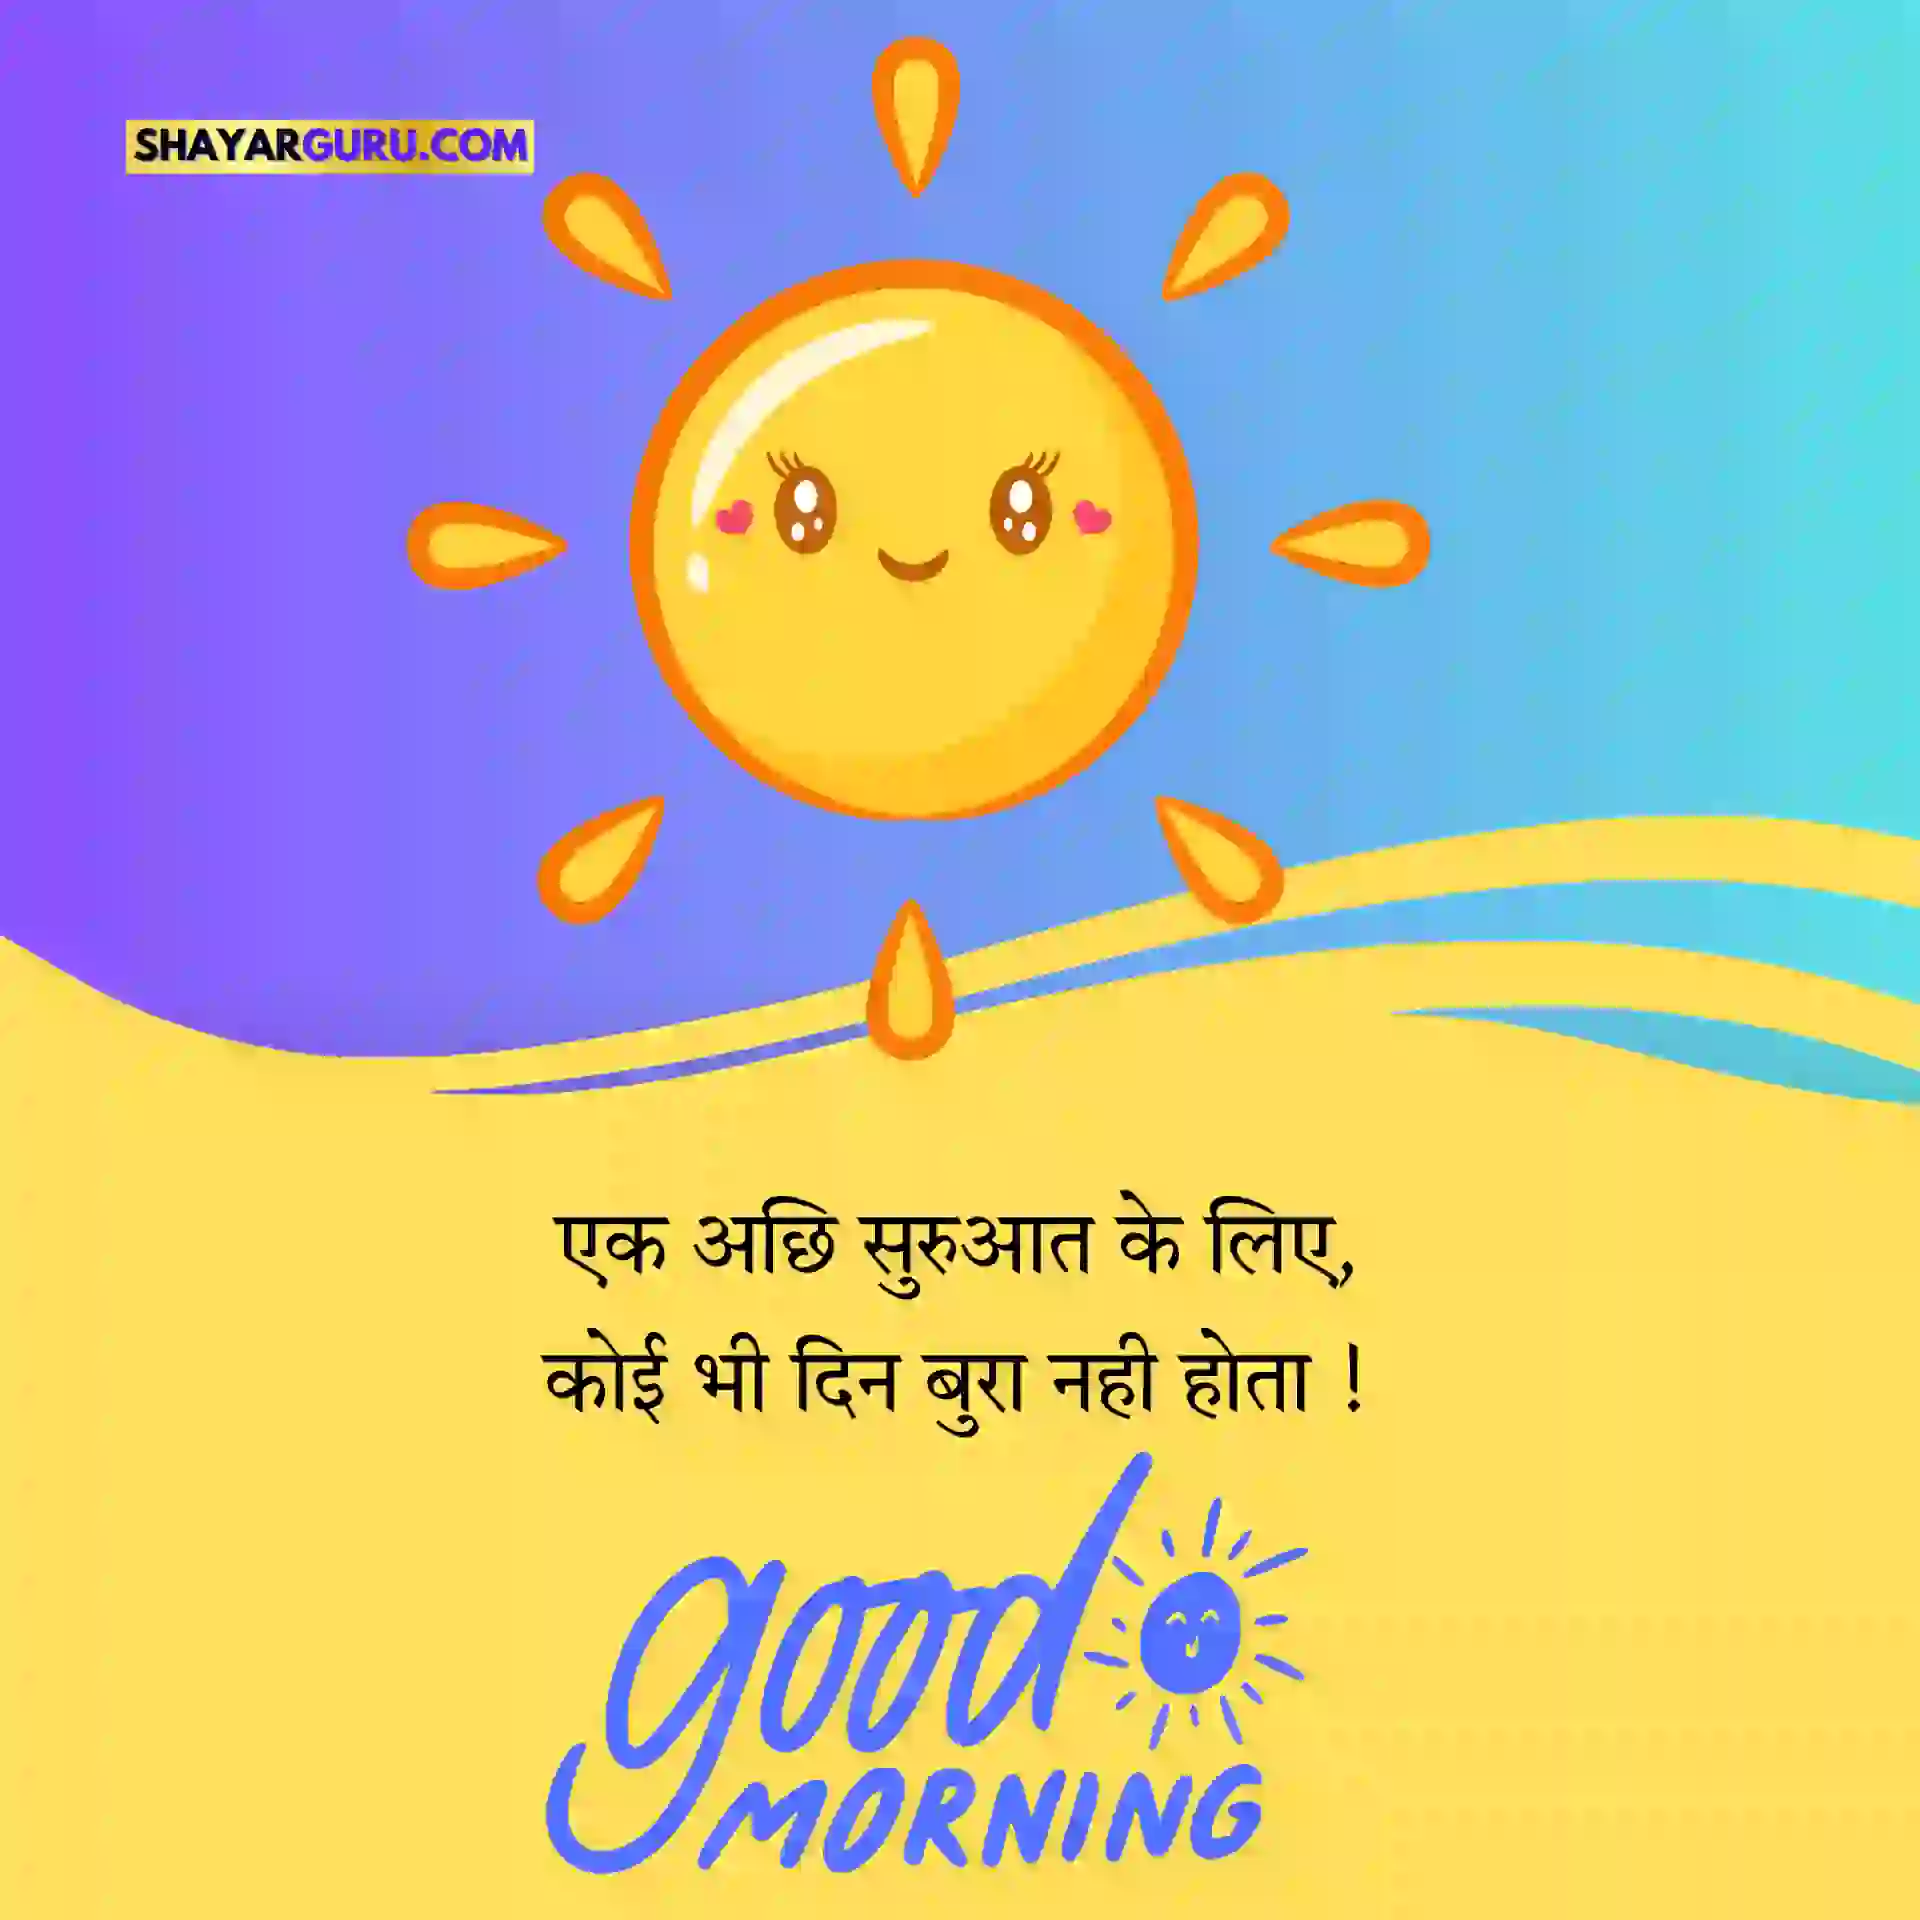 Good morning Messages in Hindi